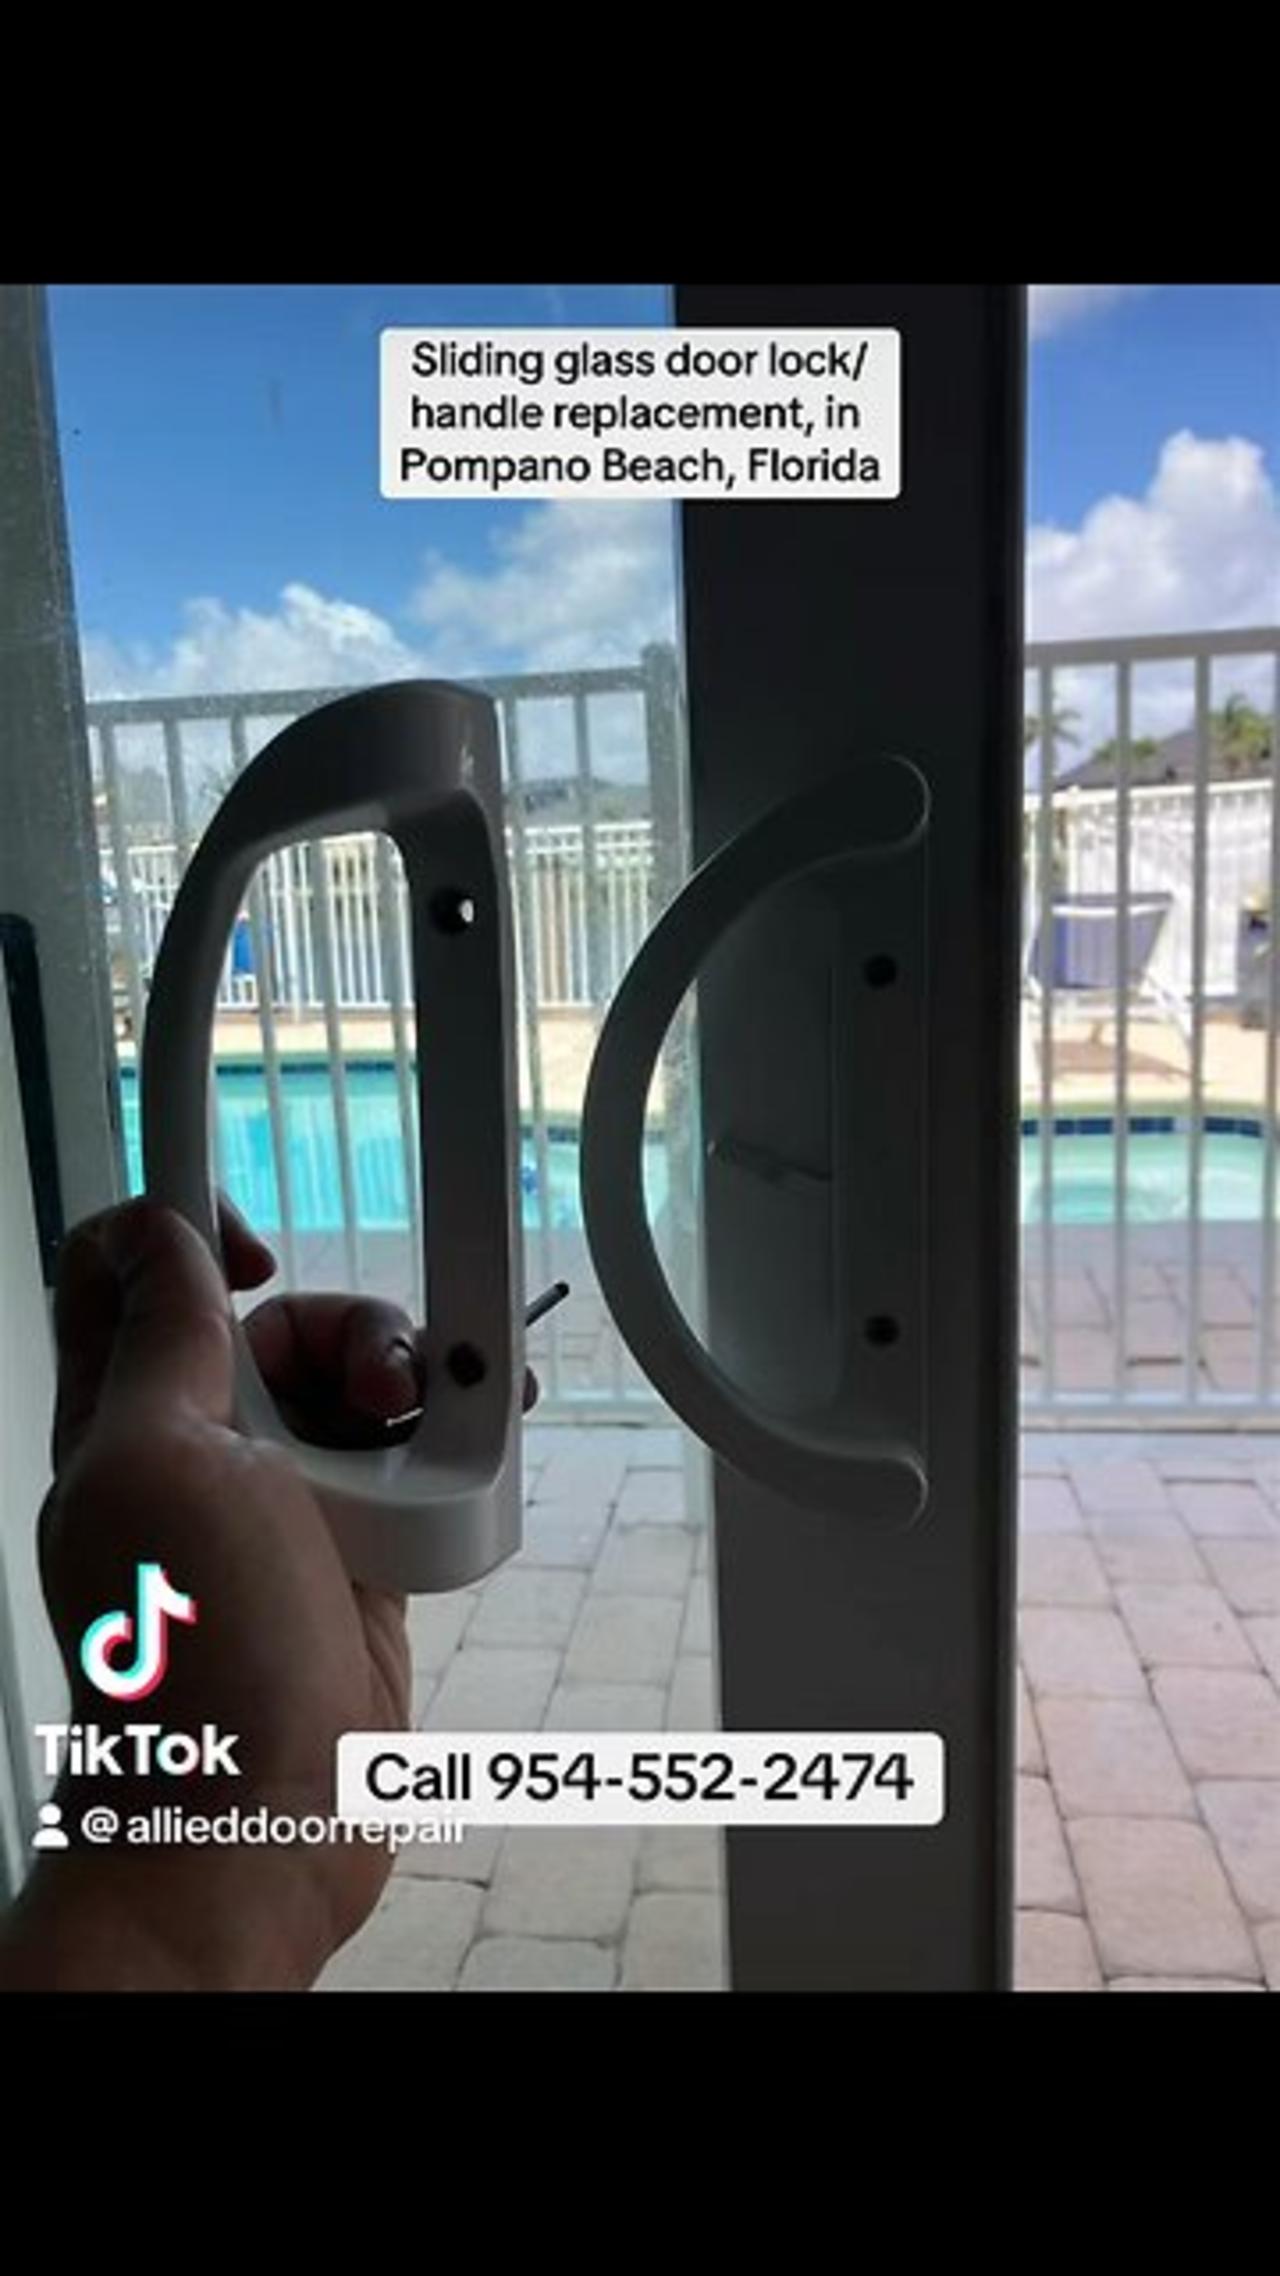 Sliding glass door lock and handle replacement in Pompano Beach, Fl.